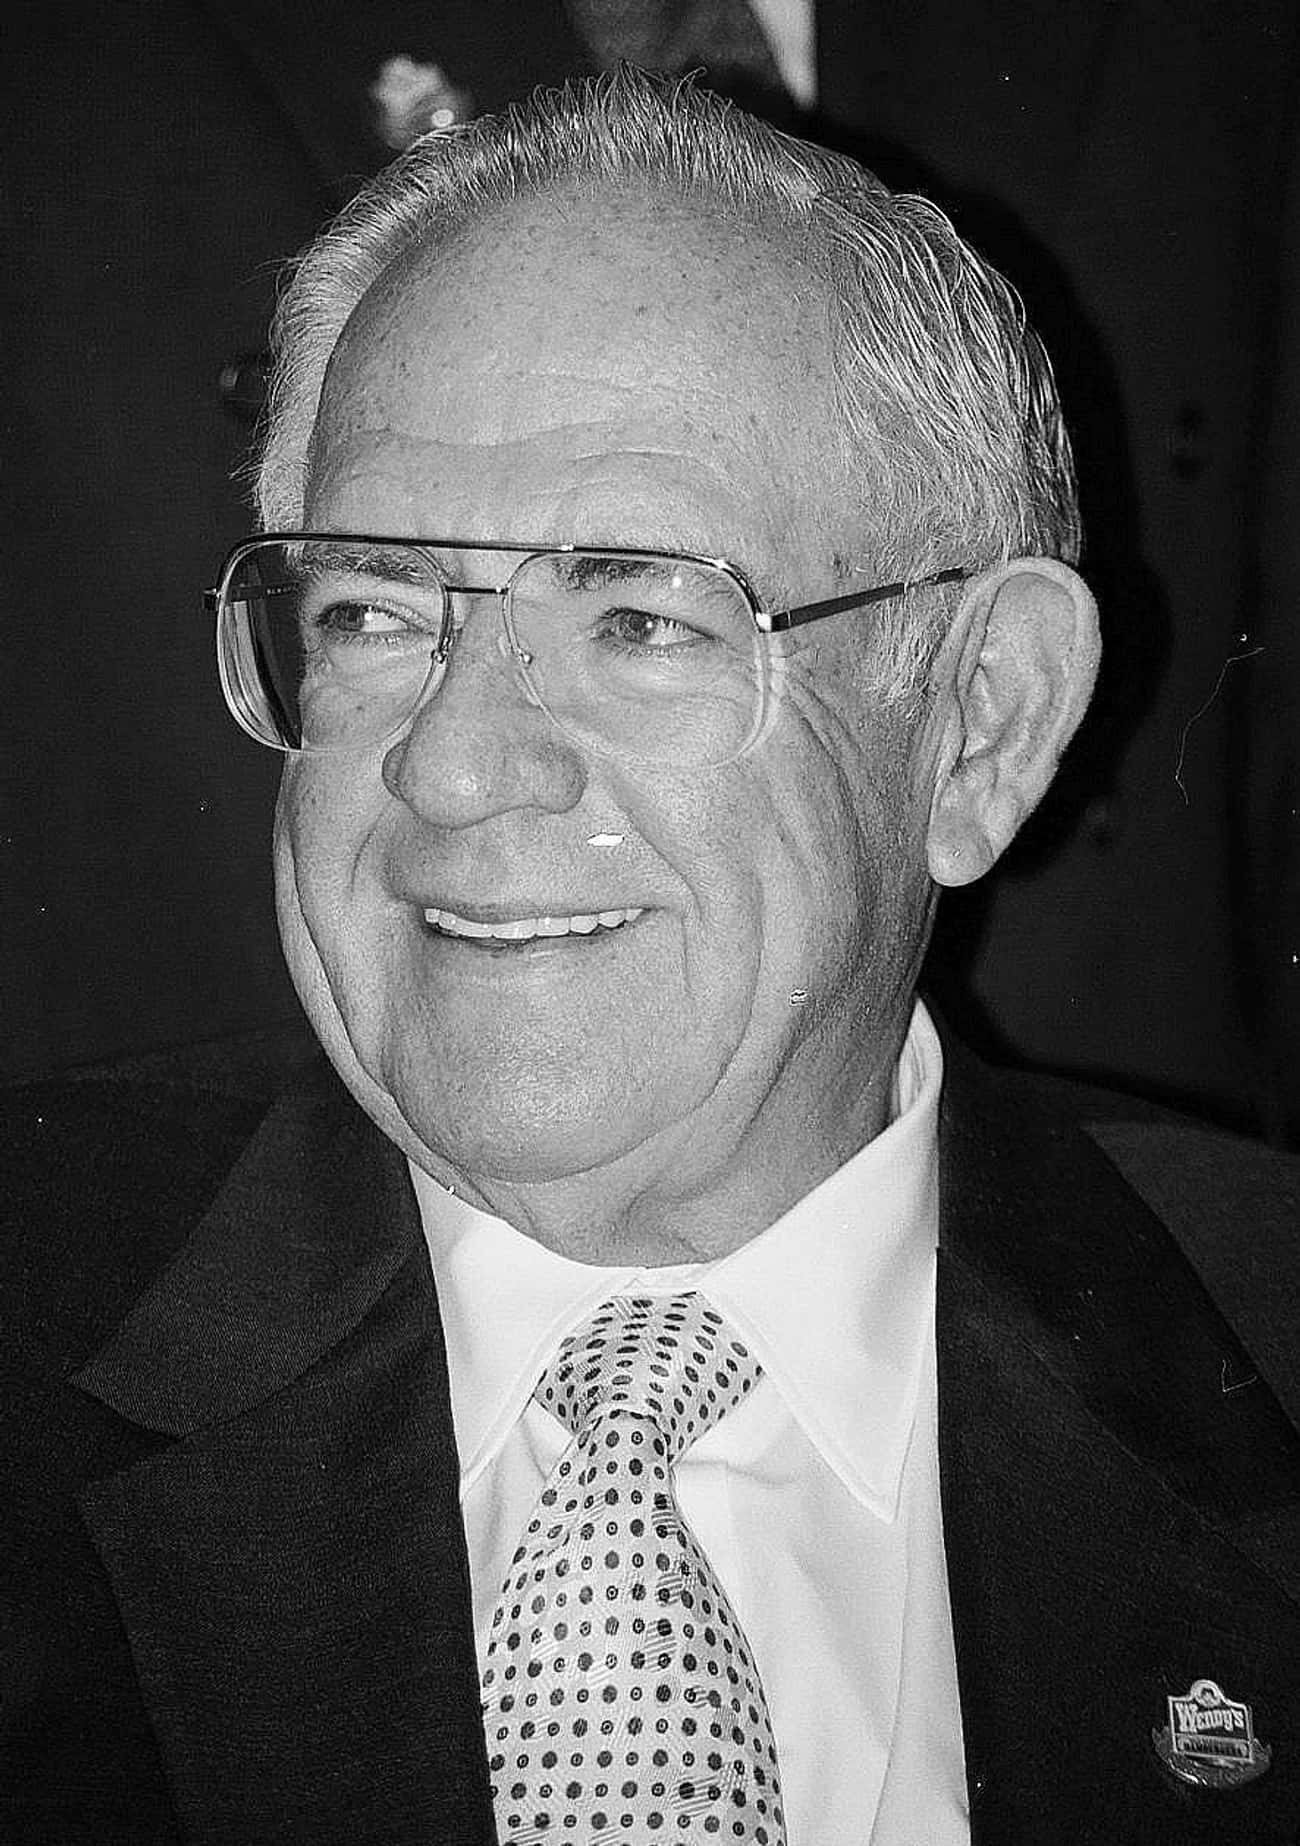 Wendy's Founder Dave Thomas Was The Star Mentee Of Colonel Sanders
